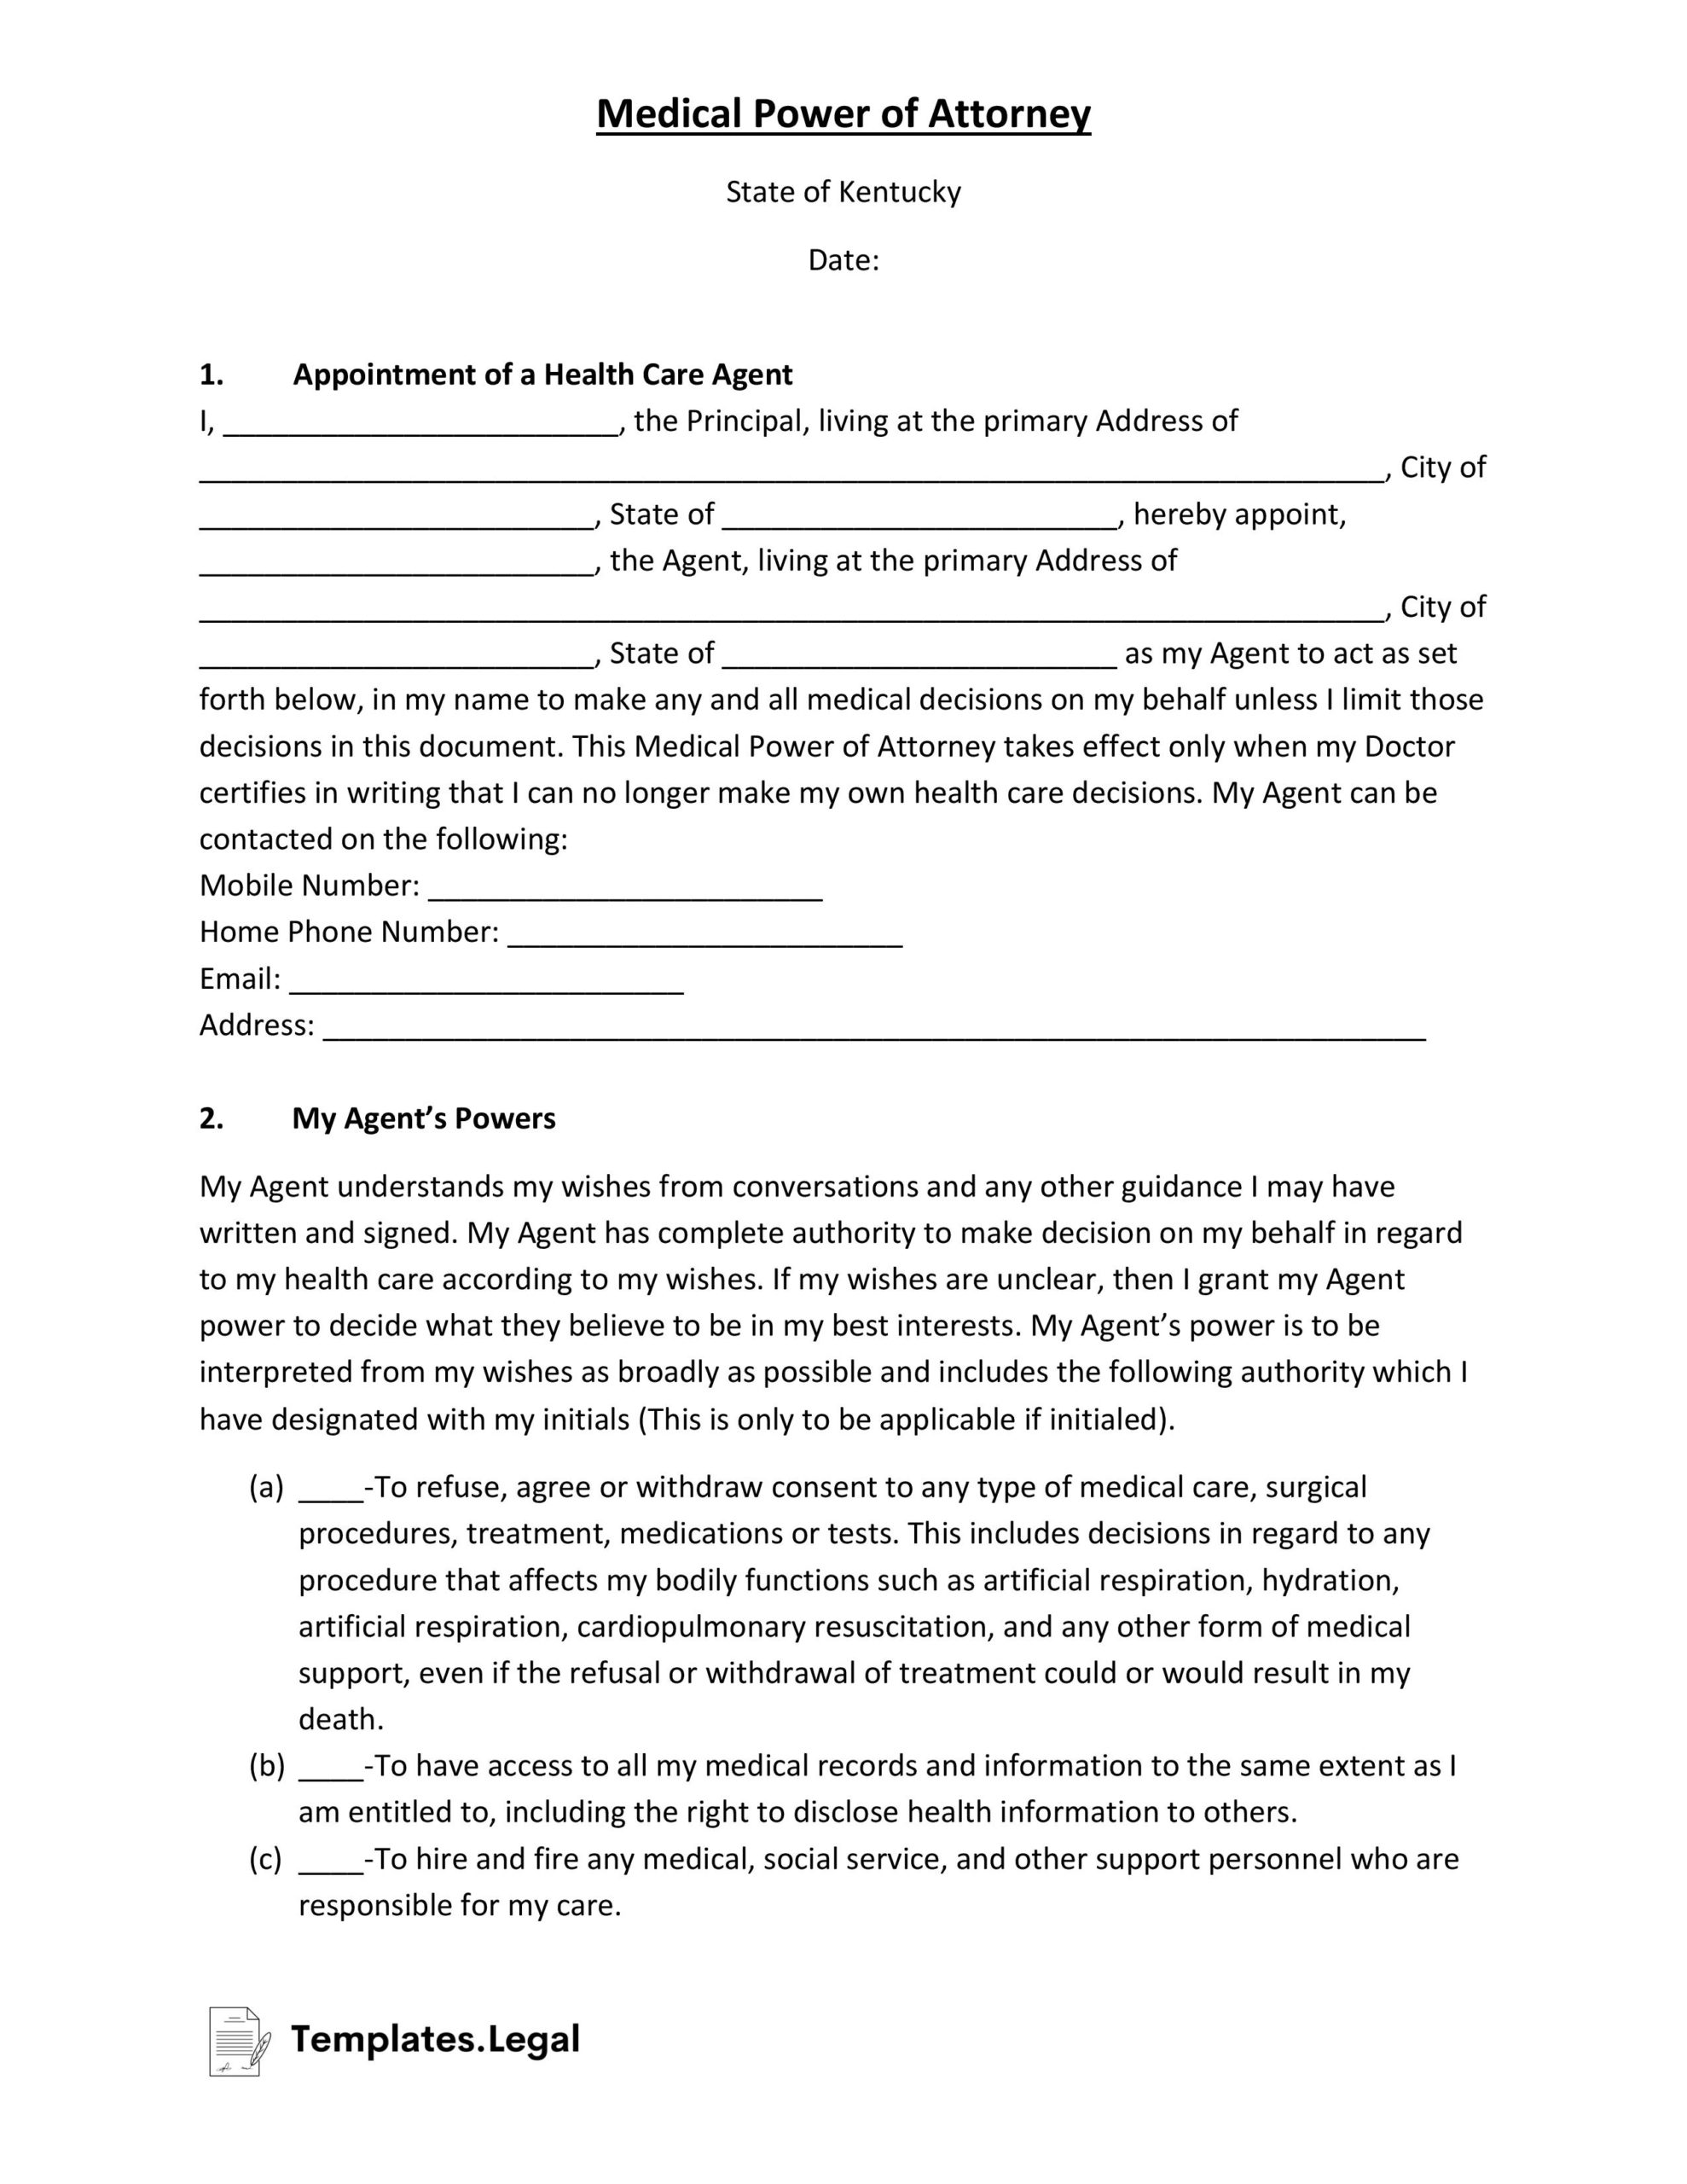 Kentucky Medical Power of Attorney- Templates.Legal